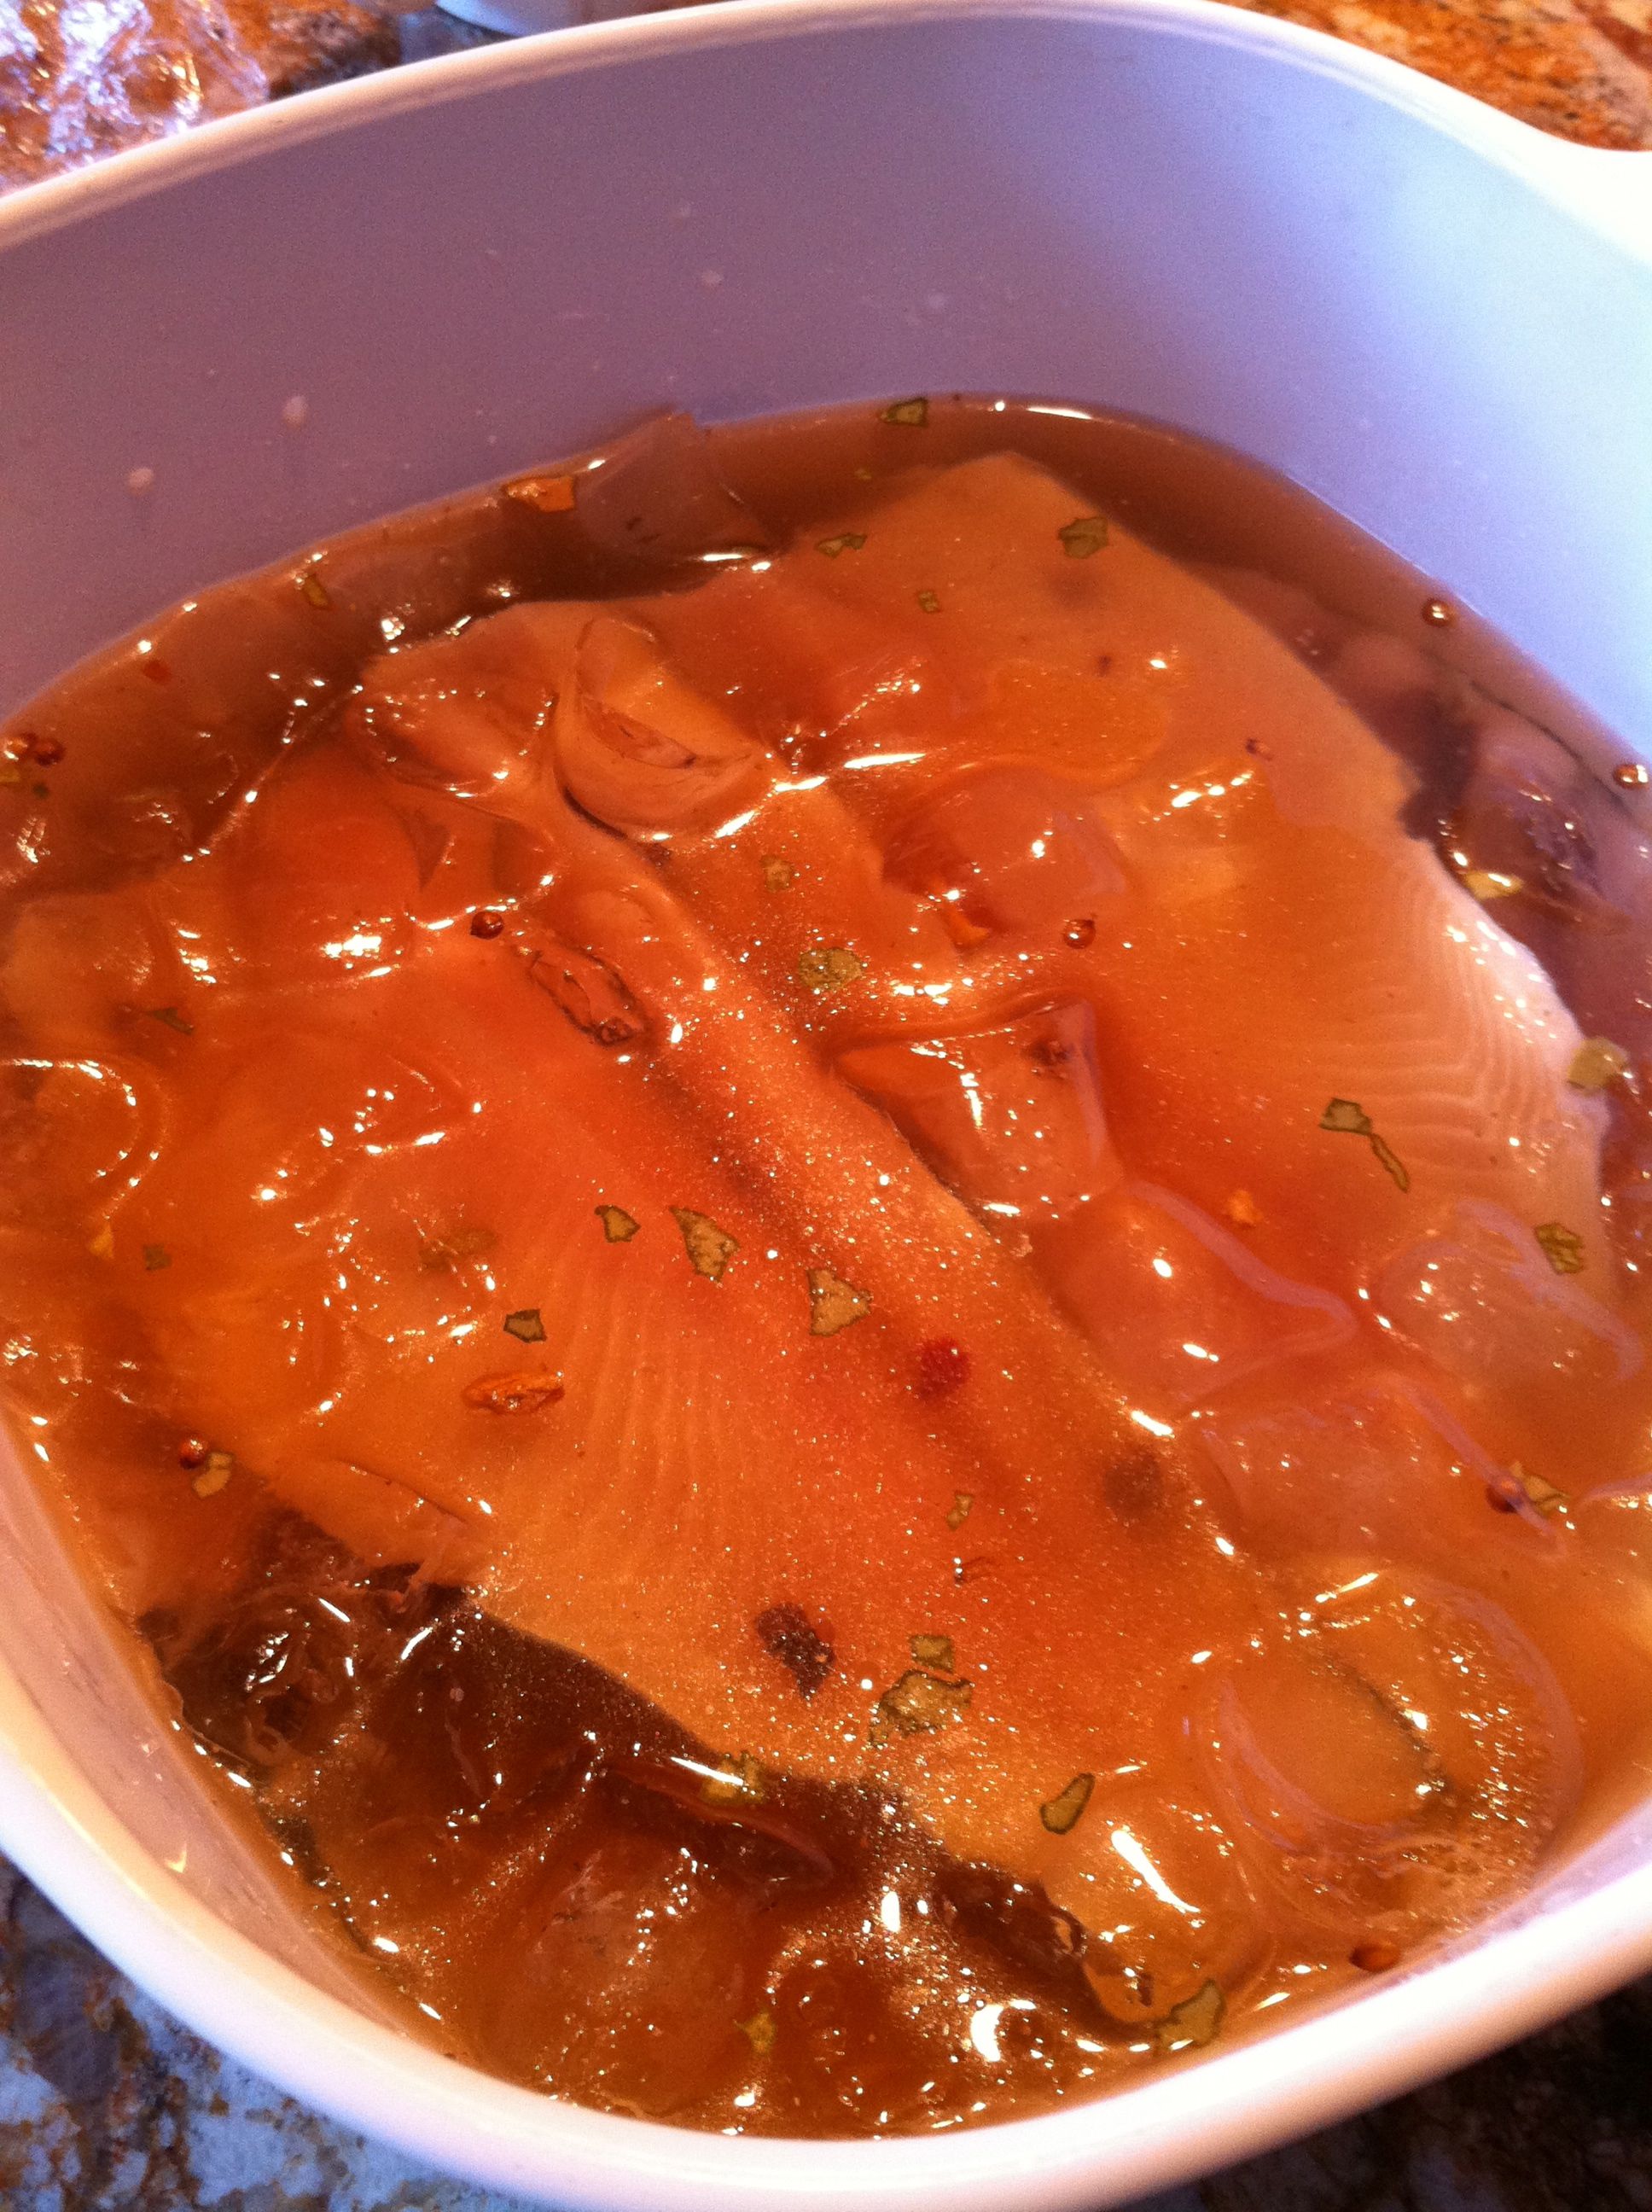 Smoked Trout rests in a flavorful brine for 8-12 hours, with a little bit of sweet